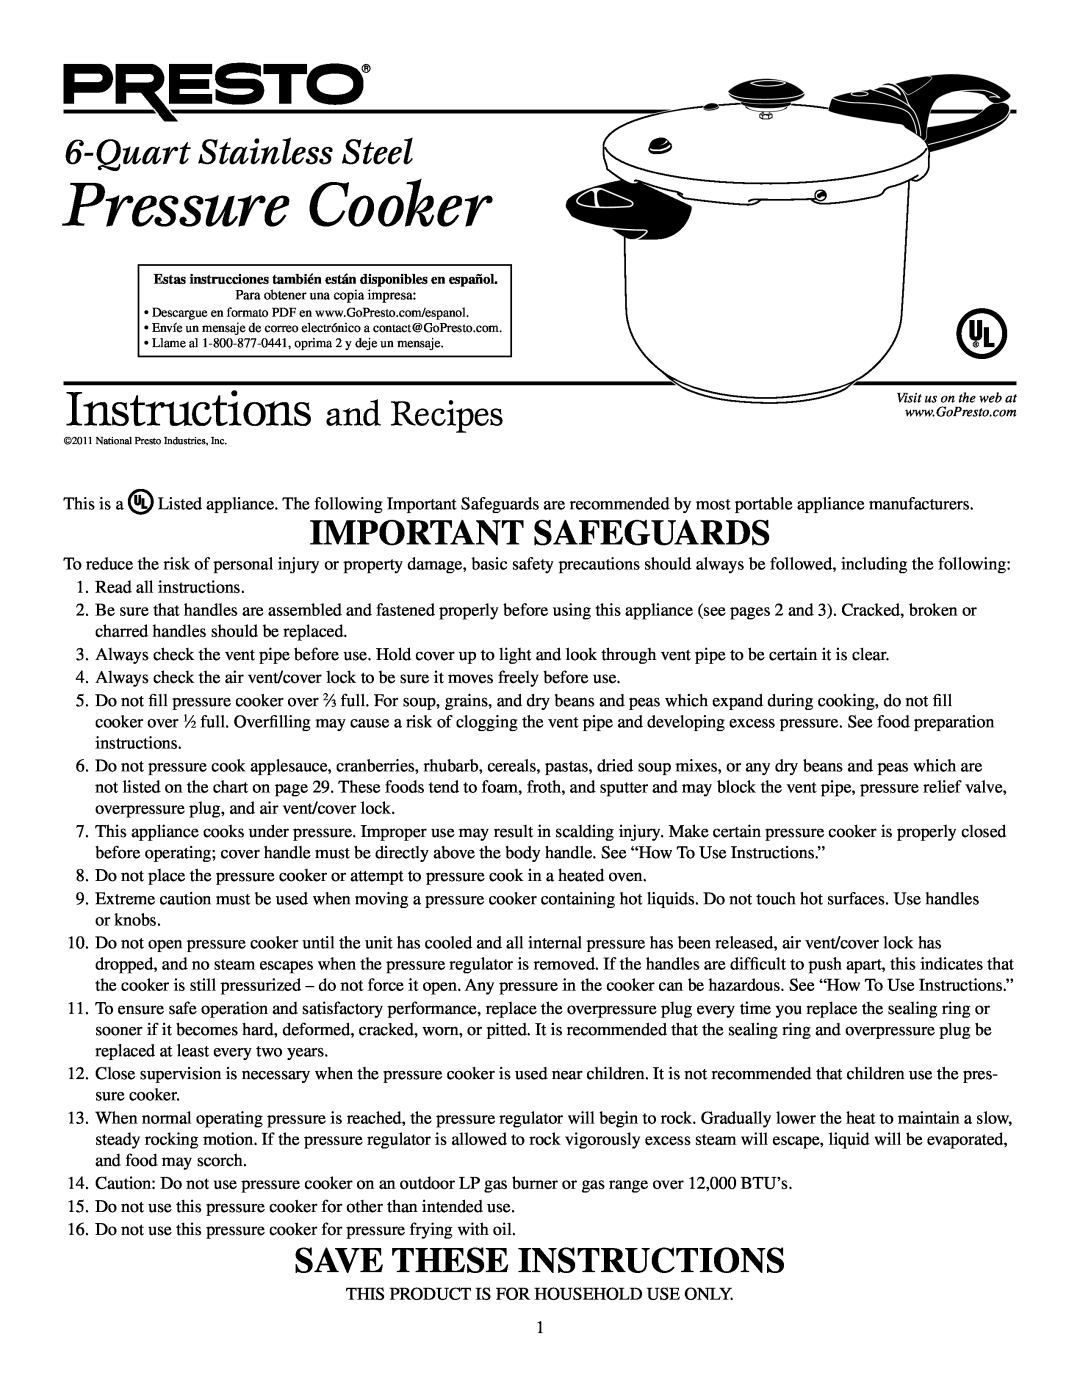 Presto Electric Pressure Cooker manual Instructions and Recipes, Quart Stainless Steel, Important Safeguards 